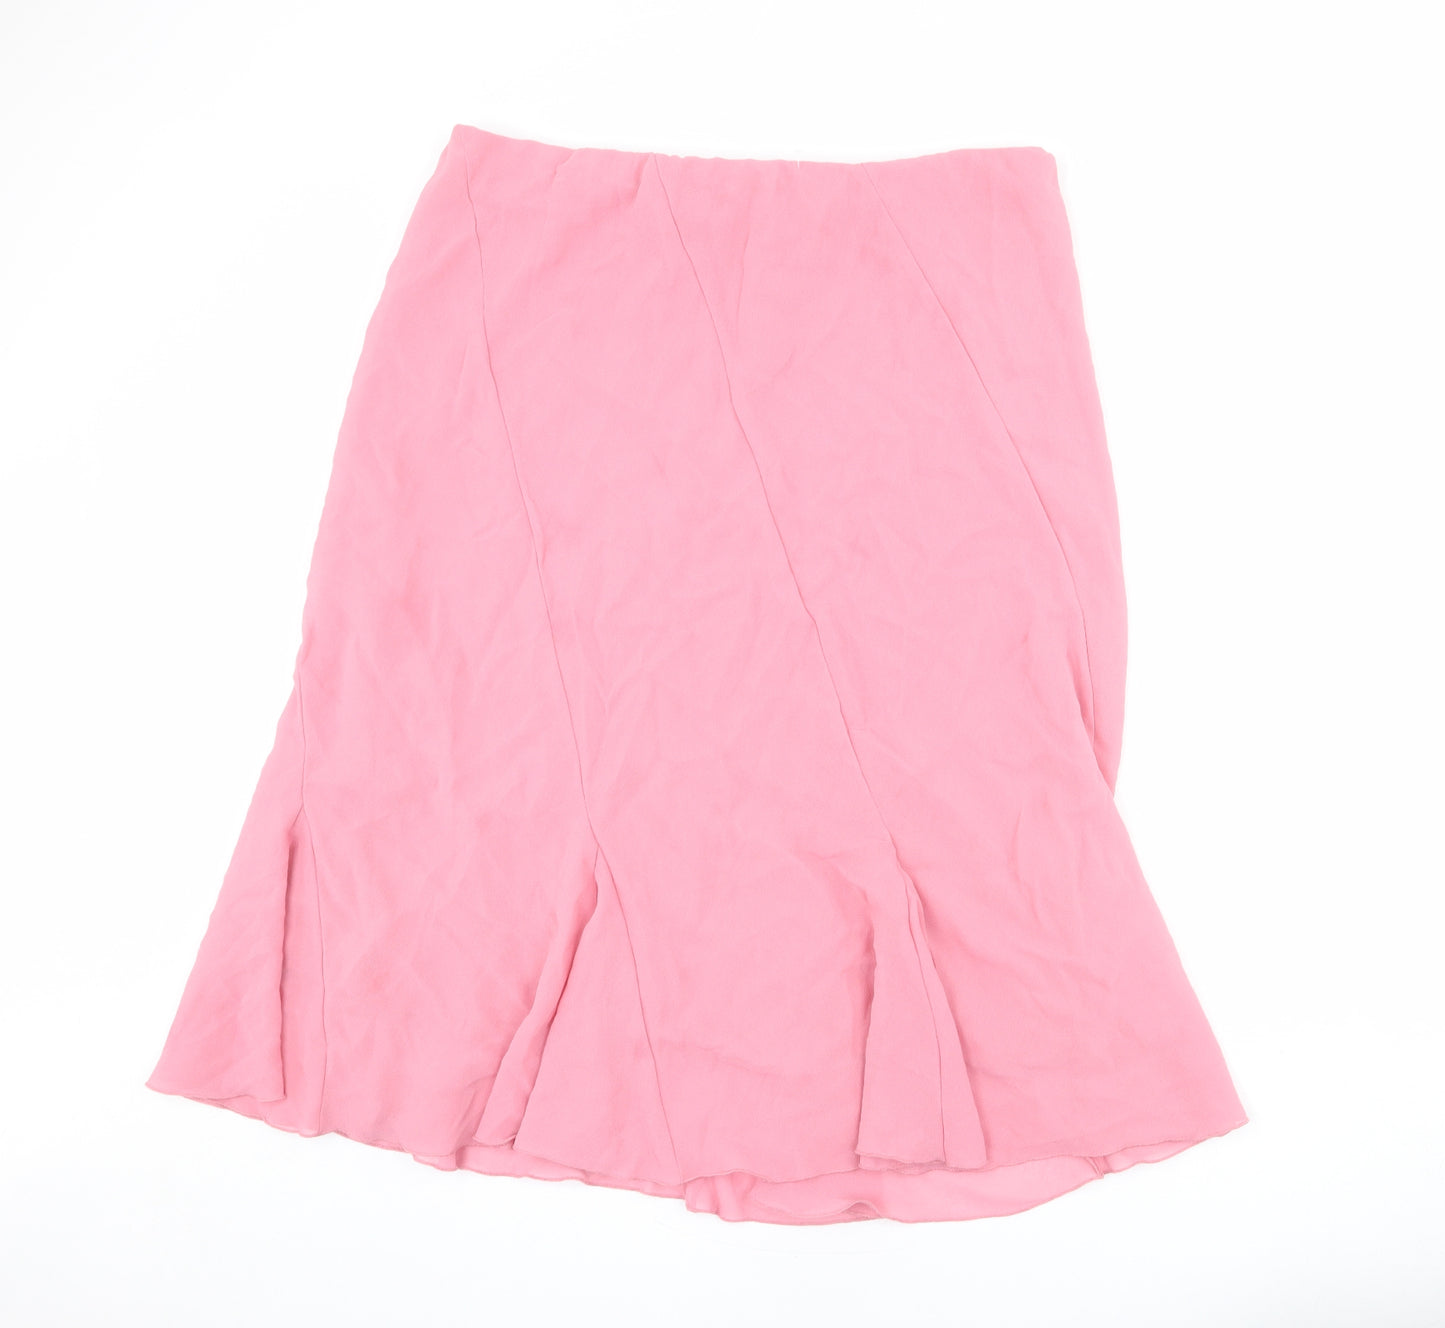 Bonmarché Womens Pink Polyester Swing Skirt Size 20